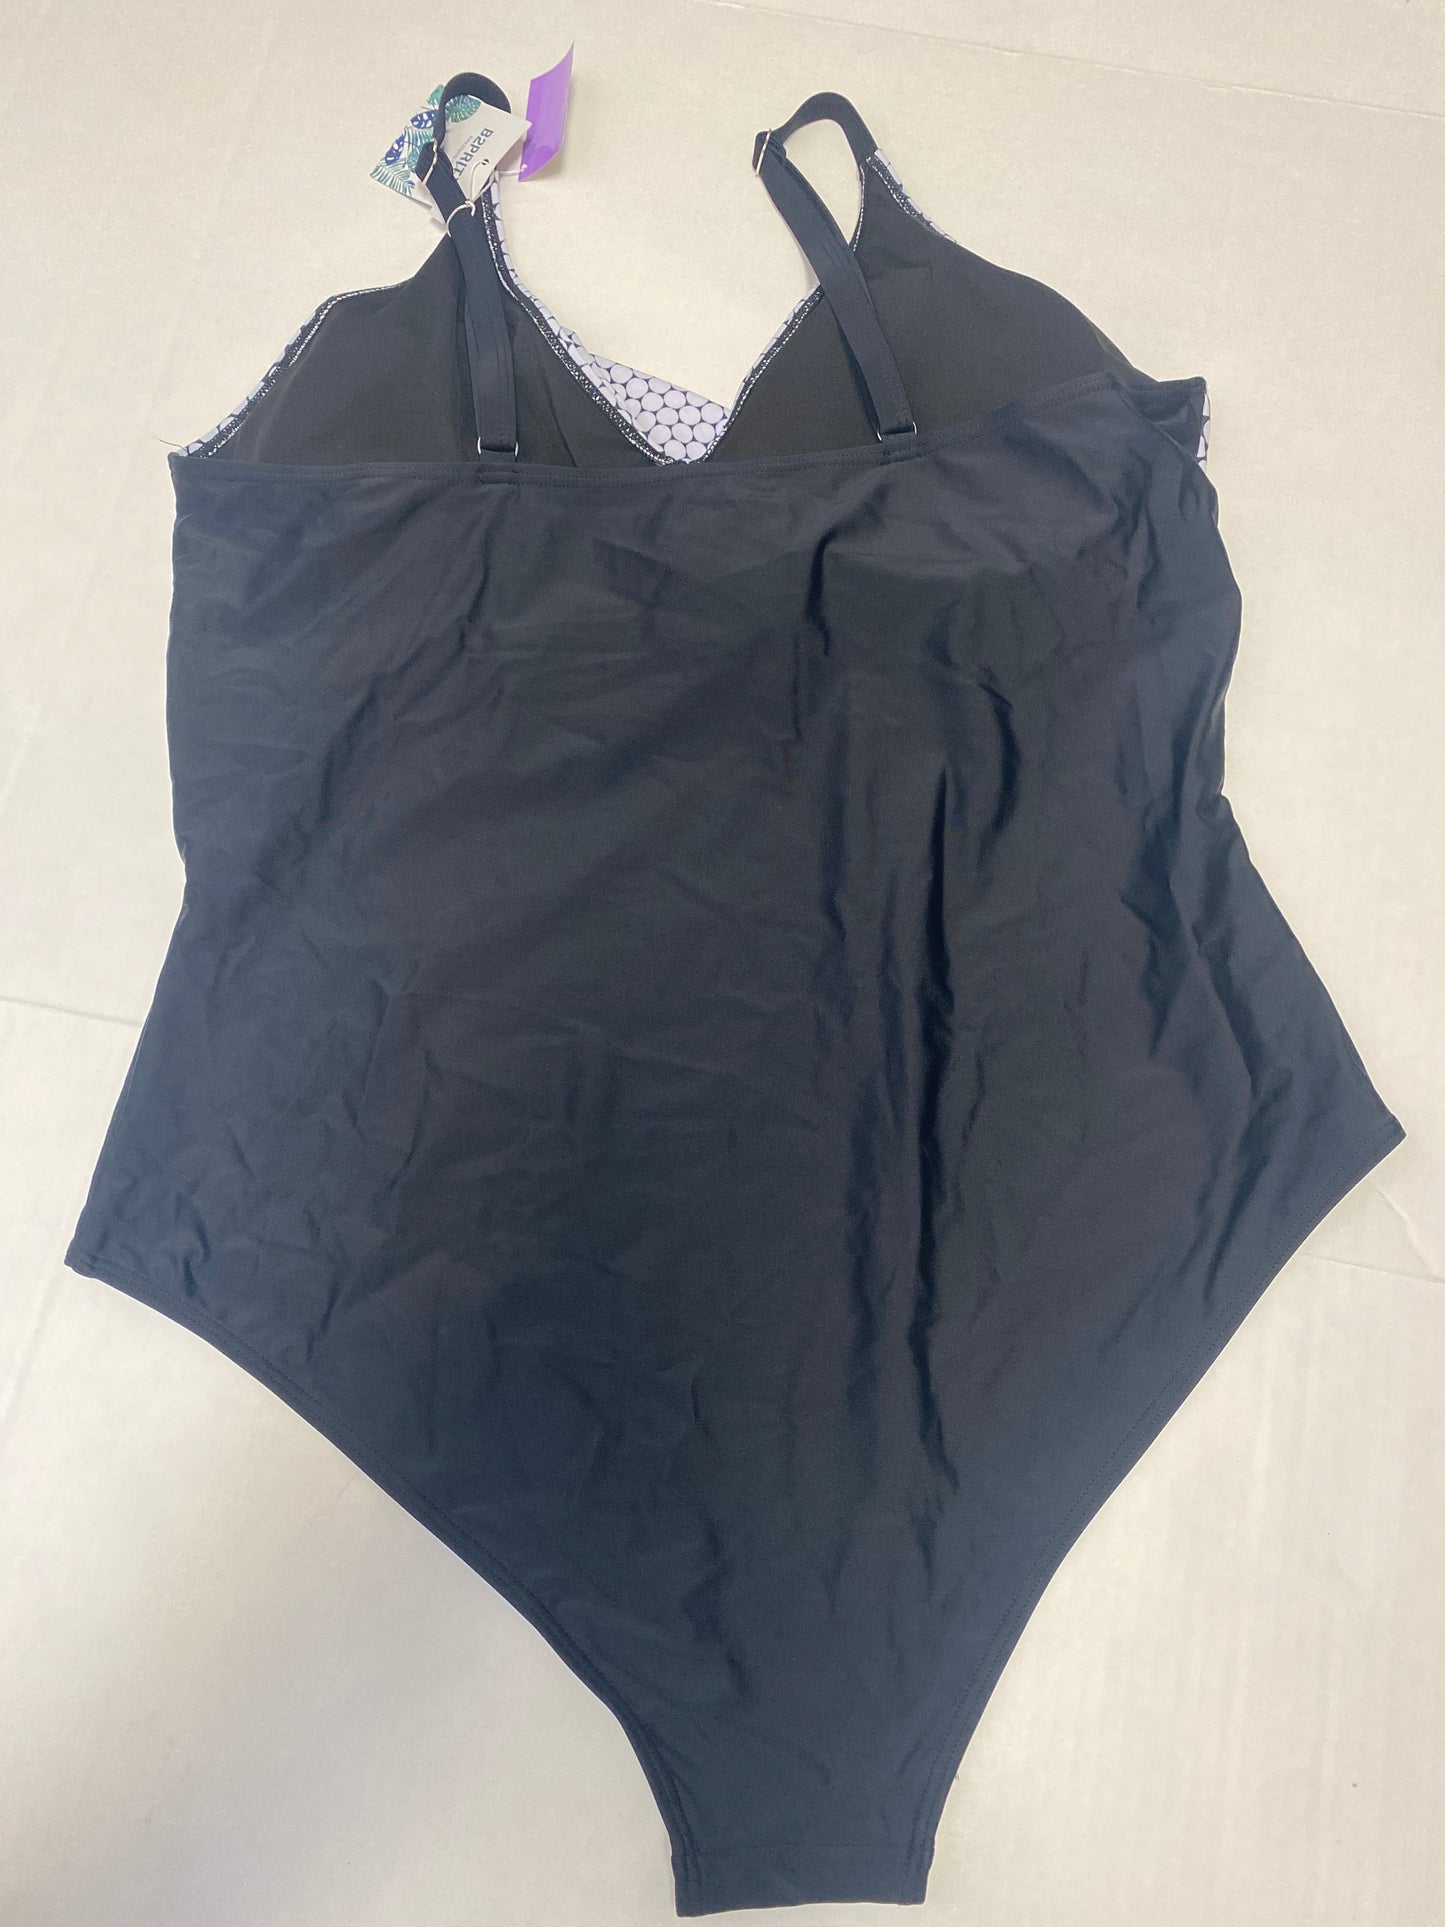 Swimsuit By Clothes Mentor  Size: 2x